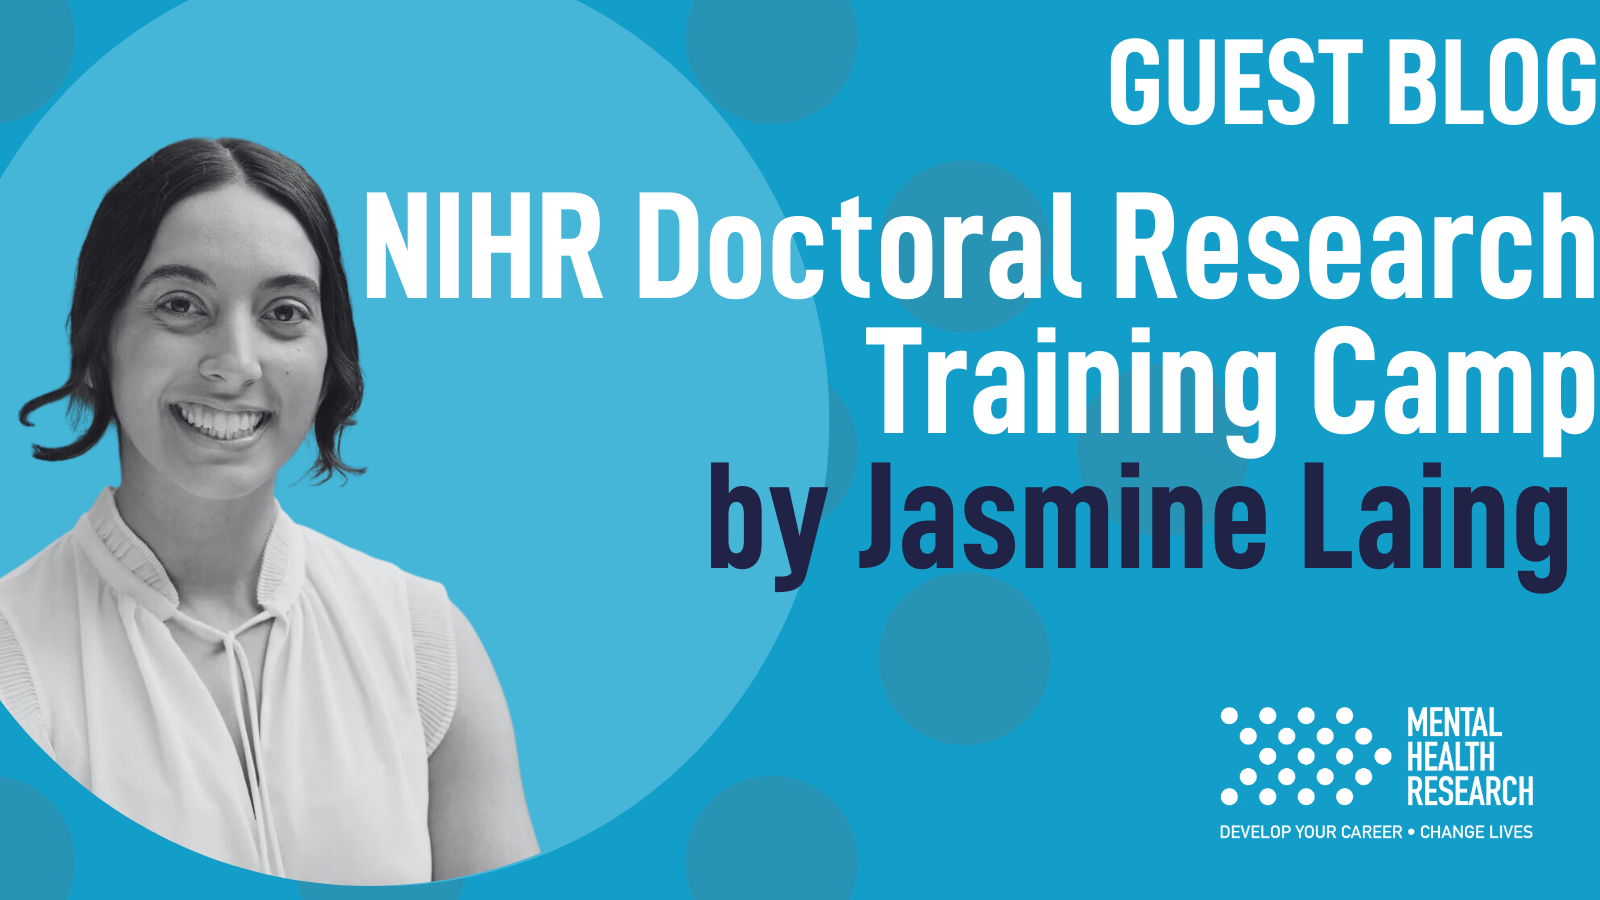 NIHR Doctoral Research Training Camp – Guest blog